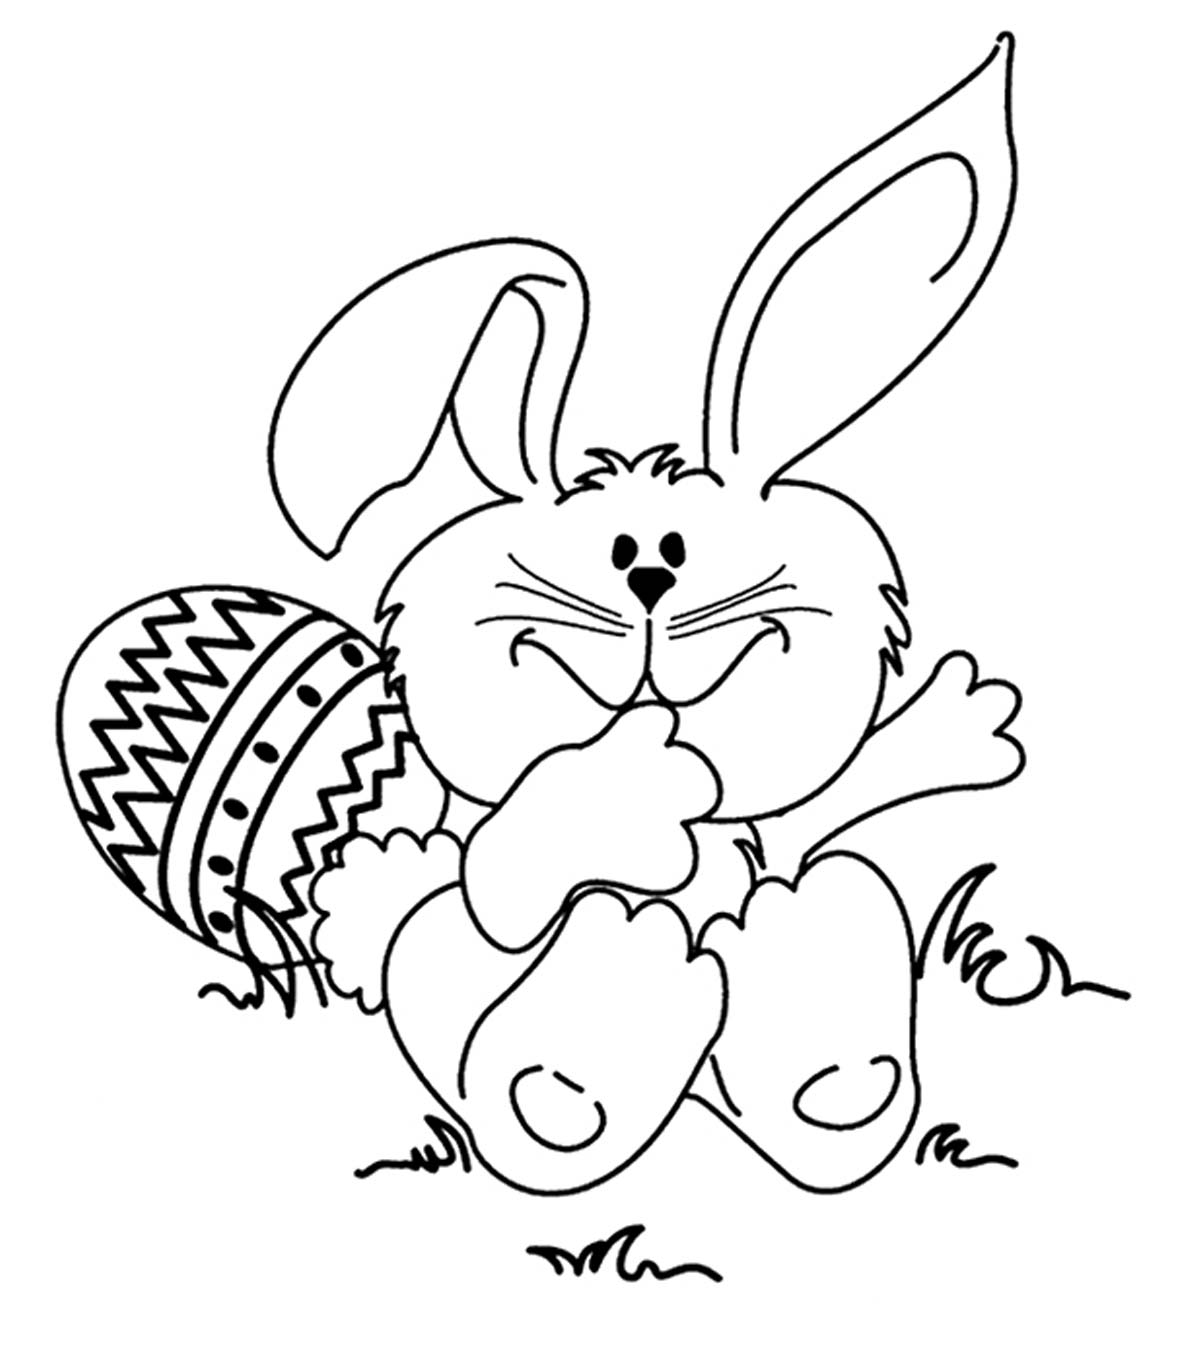 10 Cute & Funny Rabbit Coloring Pages For Your Toddler